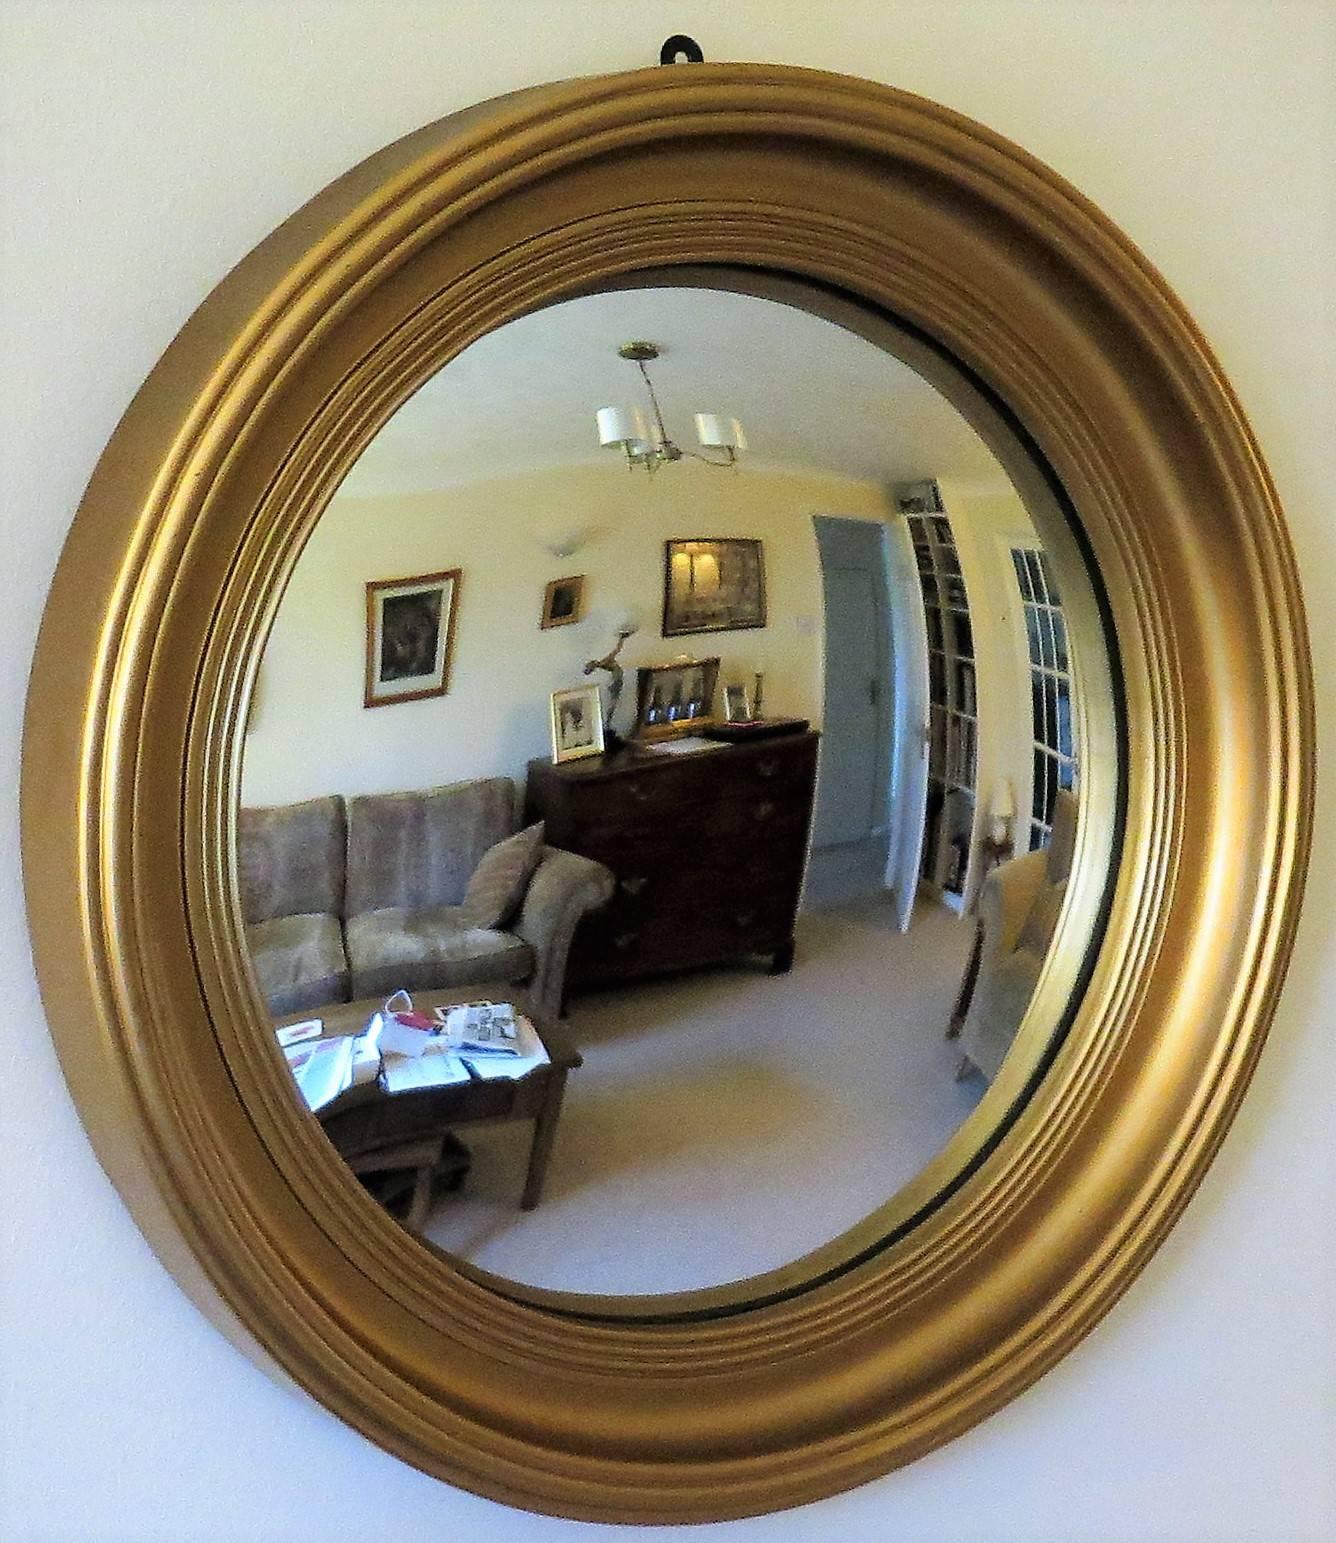 Glazed Round Convex Mirror Giltwood in Regency Style with reeded detail, circa 1920